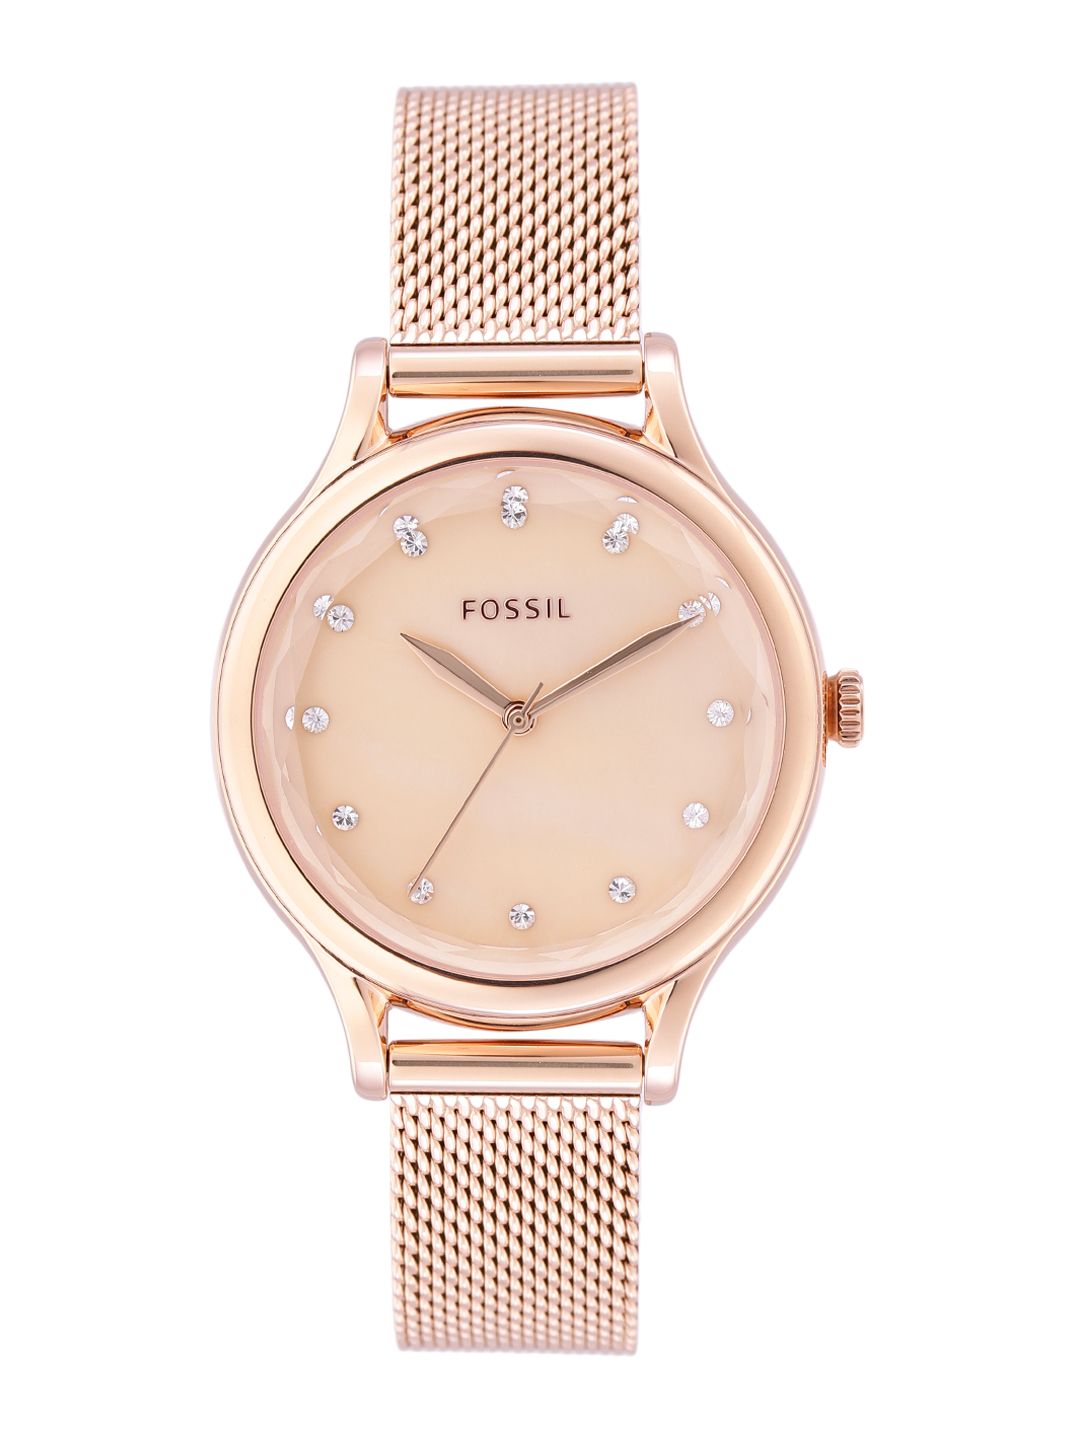 Fossil Women Rose-Gold Toned Laney Straps Analogue Watch BQ3392 Price in India